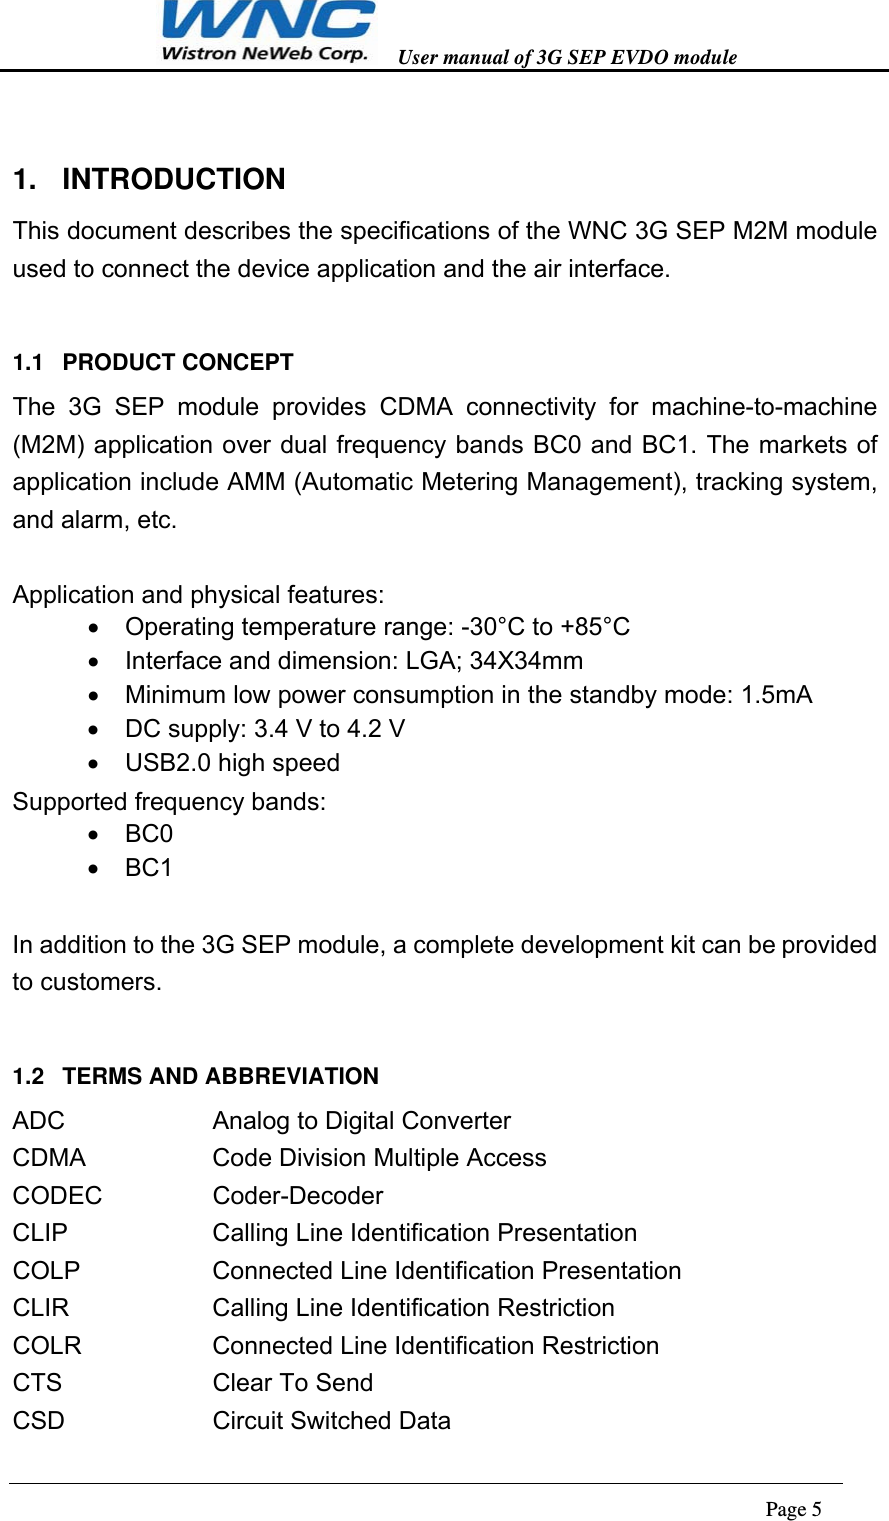   User manual of 3G SEP EVDO module                                                                      Page 5  1. INTRODUCTION This document describes the specifications of the WNC 3G SEP M2M module used to connect the device application and the air interface. 1.1 PRODUCT CONCEPT The 3G SEP module provides CDMA connectivity for machine-to-machine (M2M) application over dual frequency bands BC0 and BC1. The markets of application include AMM (Automatic Metering Management), tracking system, and alarm, etc.  Application and physical features:  Operating temperature range: -30°C to +85°C   Interface and dimension: LGA; 34X34mm   Minimum low power consumption in the standby mode: 1.5mA   DC supply: 3.4 V to 4.2 V   USB2.0 high speed Supported frequency bands:  BC0  BC1  In addition to the 3G SEP module, a complete development kit can be provided to customers. 1.2  TERMS AND ABBREVIATION ADC      Analog to Digital Converter CDMA   Code Division Multiple Access CODEC   Coder-Decoder CLIP   Calling Line Identification Presentation   COLP   Connected Line Identification Presentation   CLIR   Calling Line Identification Restriction   COLR   Connected Line Identification Restriction   CTS   Clear To Send CSD   Circuit Switched Data 